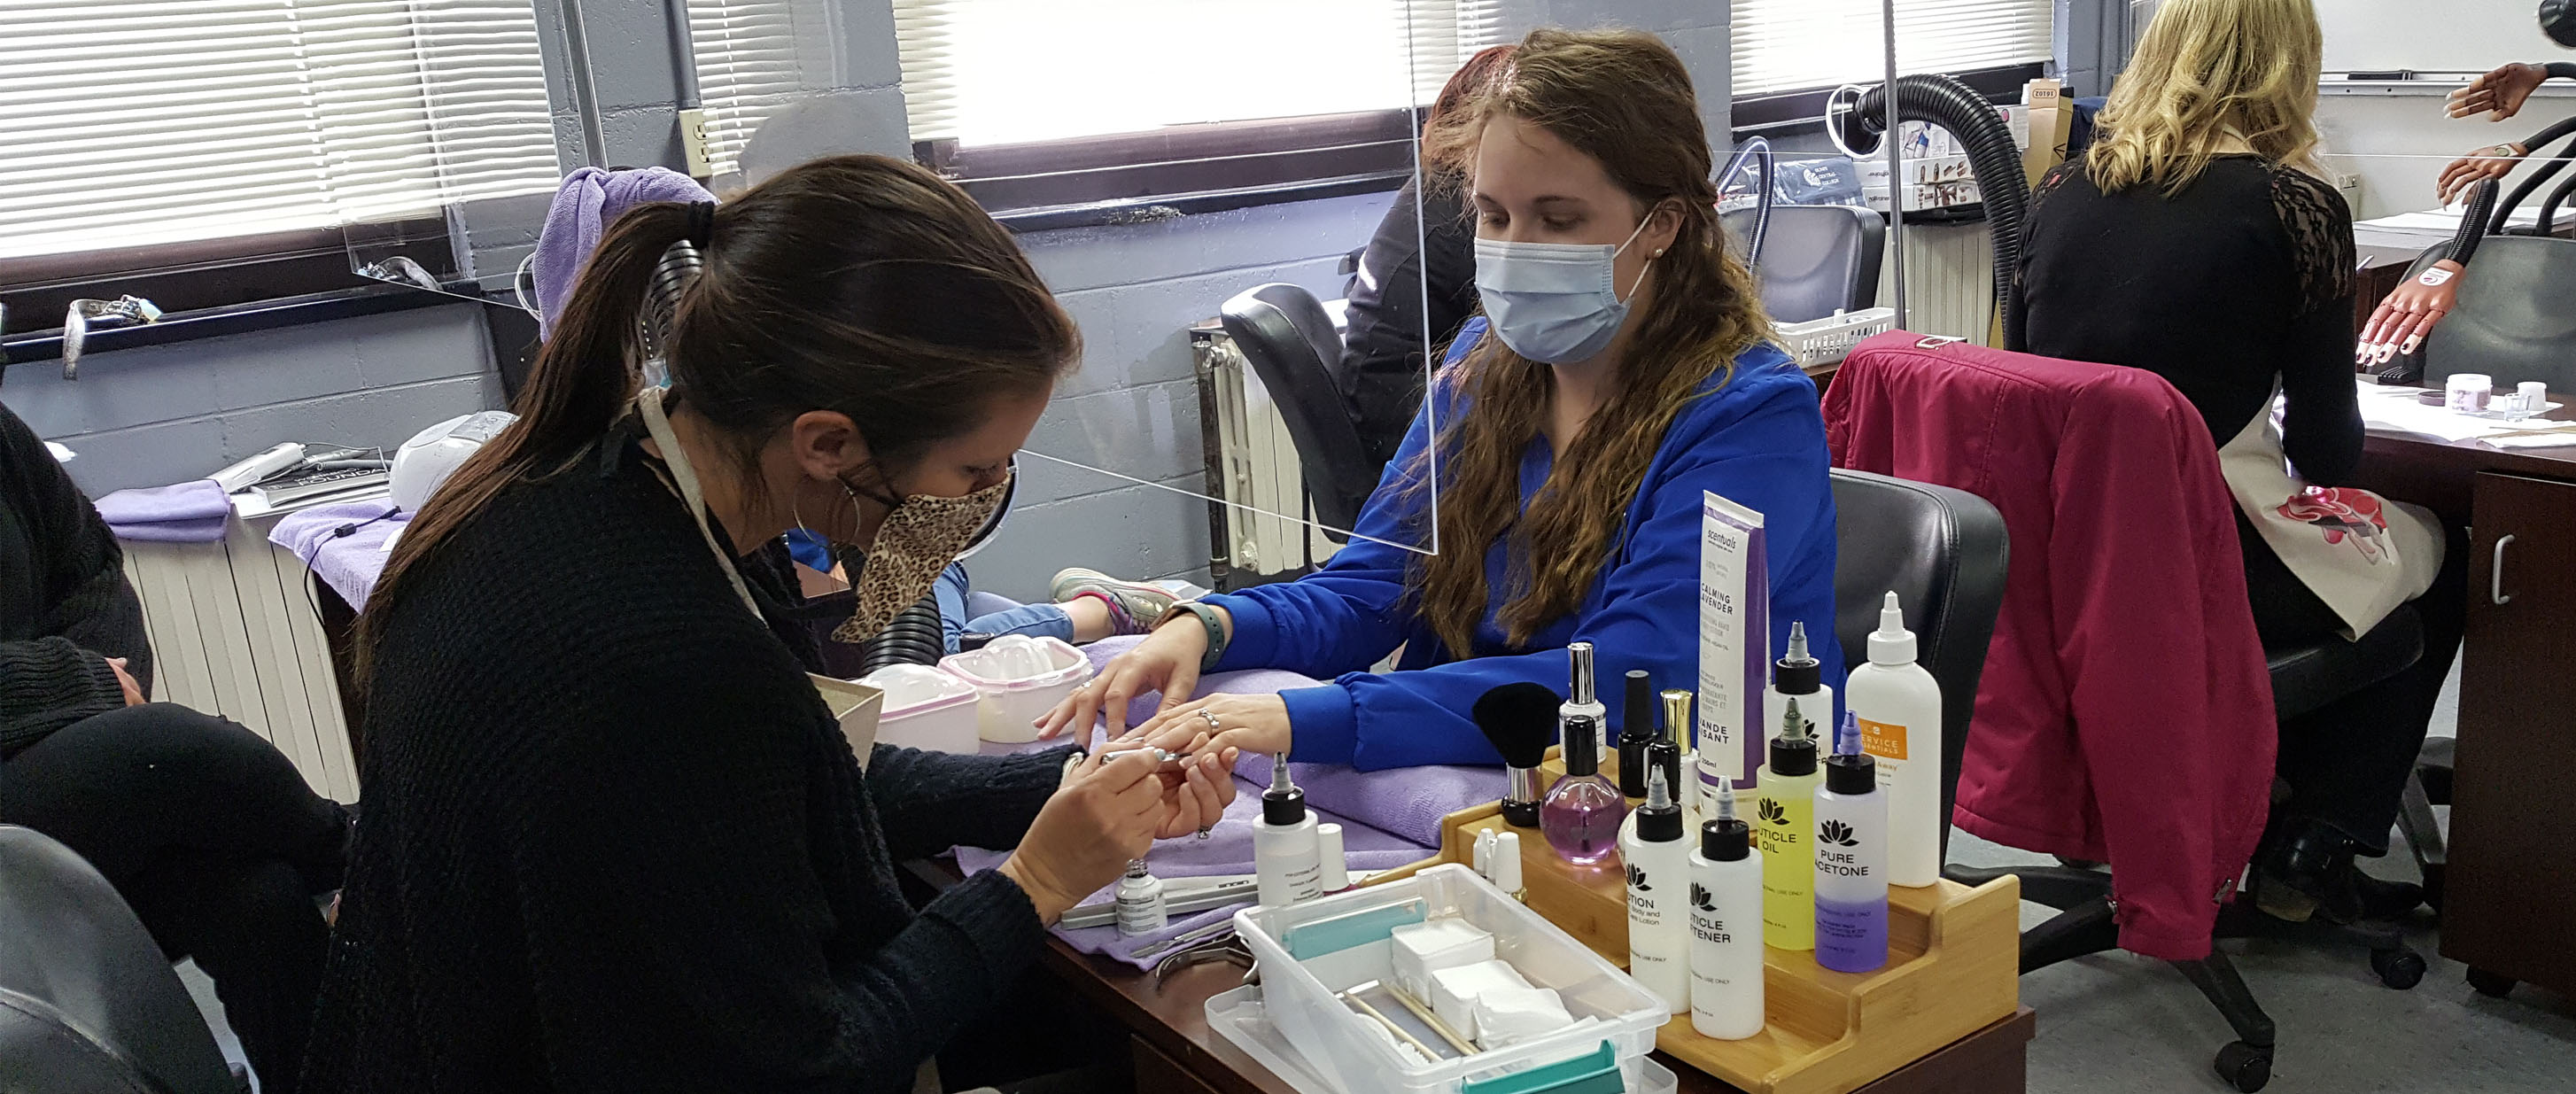 Photo of Student Giving a Client a Manicure